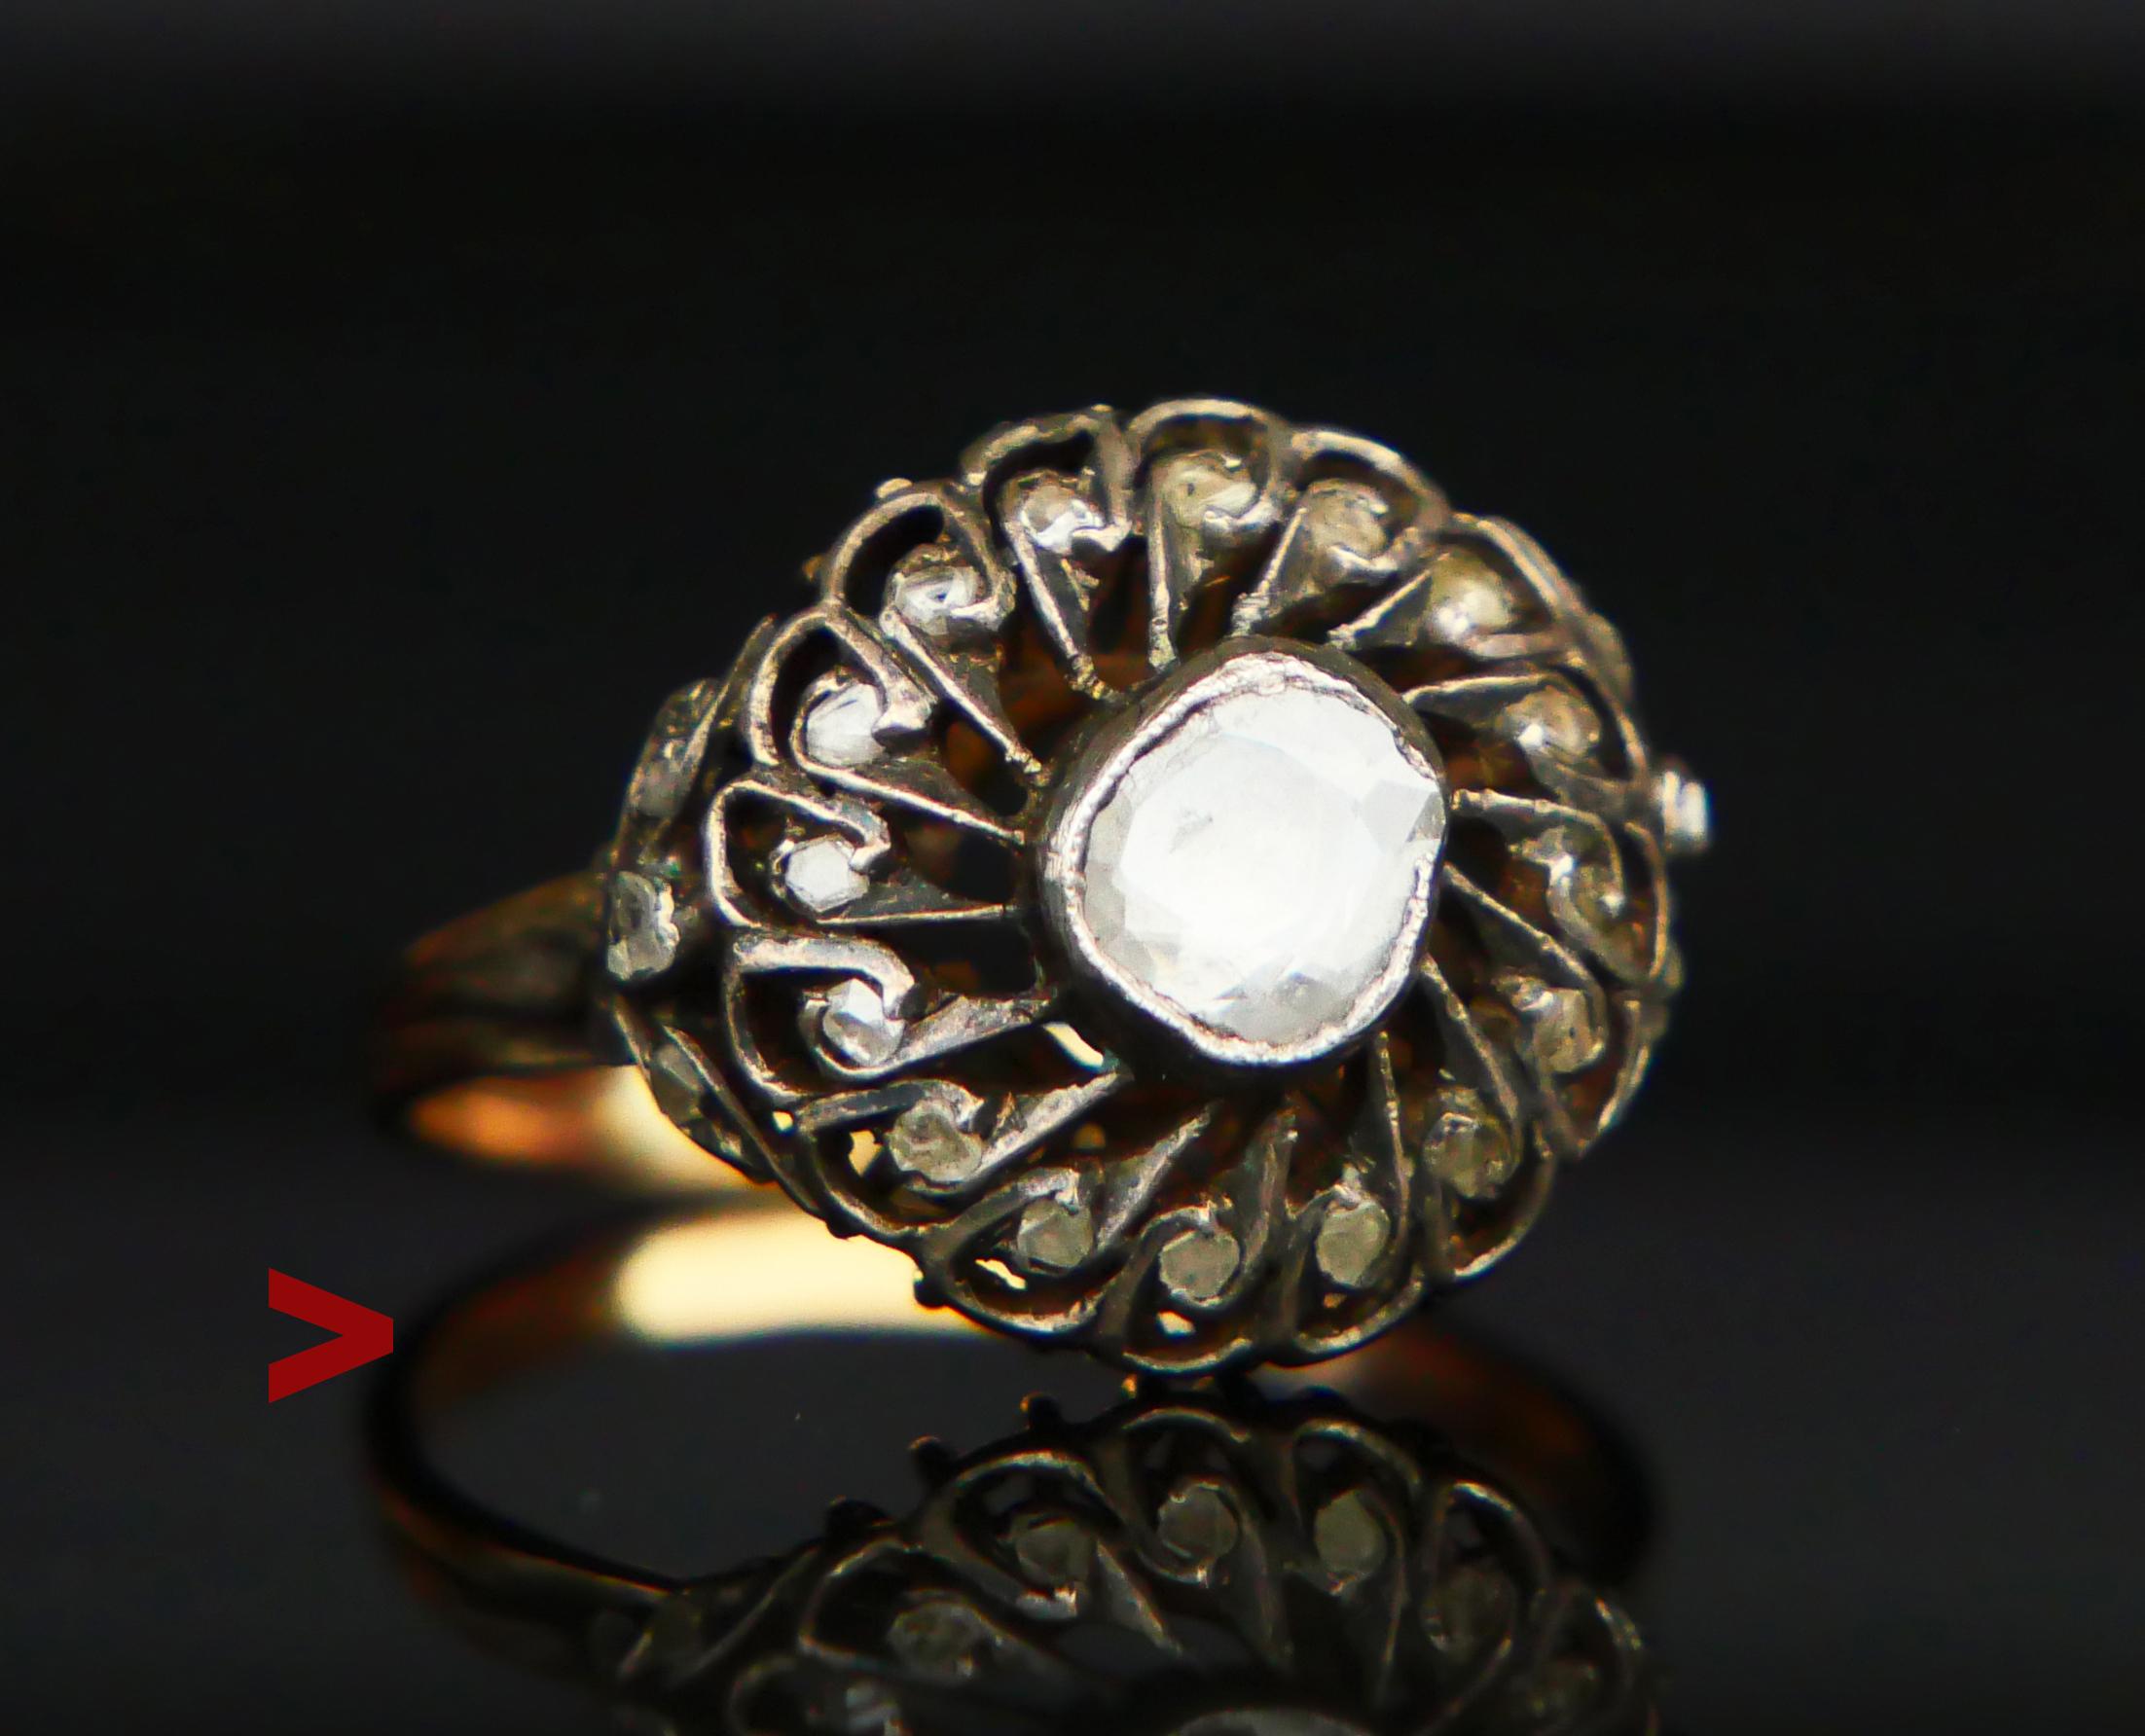 German old cluster Ring hand - made ca. late XIX -early XX cent. with parts in solid 12K Rose Gold with and top of the openwork crown in Silver.
Openwork floret/crown is a bit convex shaped for better fit and measures 16mm x 14.75mm x 8.25mm deep.